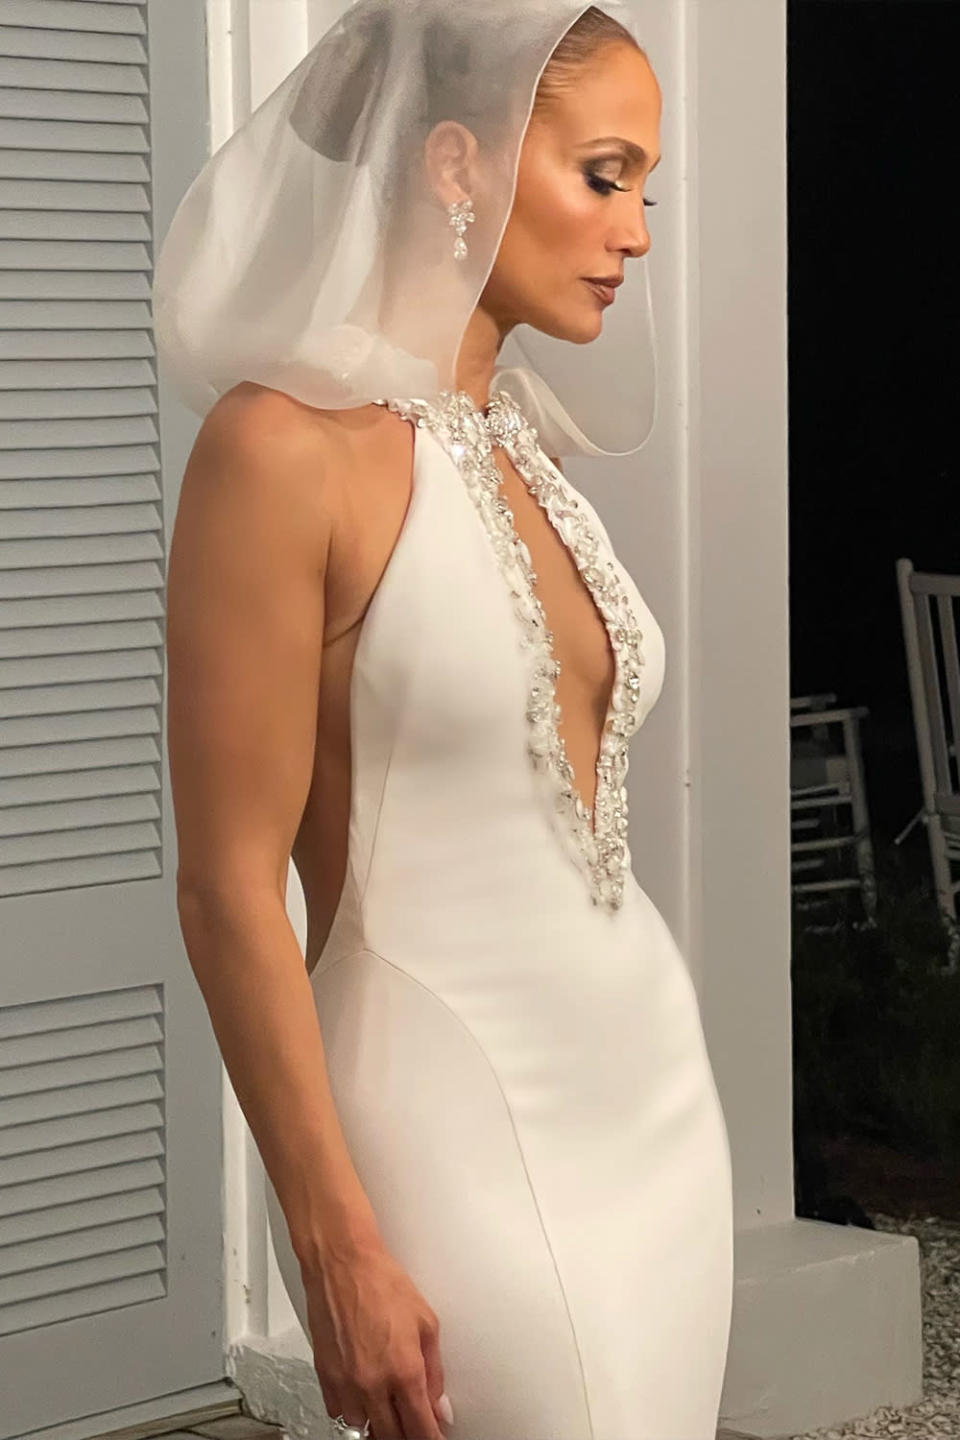 <p>The party outfit featured a sleek mermaid silhouette and a removable hood. The look also had a keyhole neckline embellished with Swarovski crystals of varying sizes.</p>